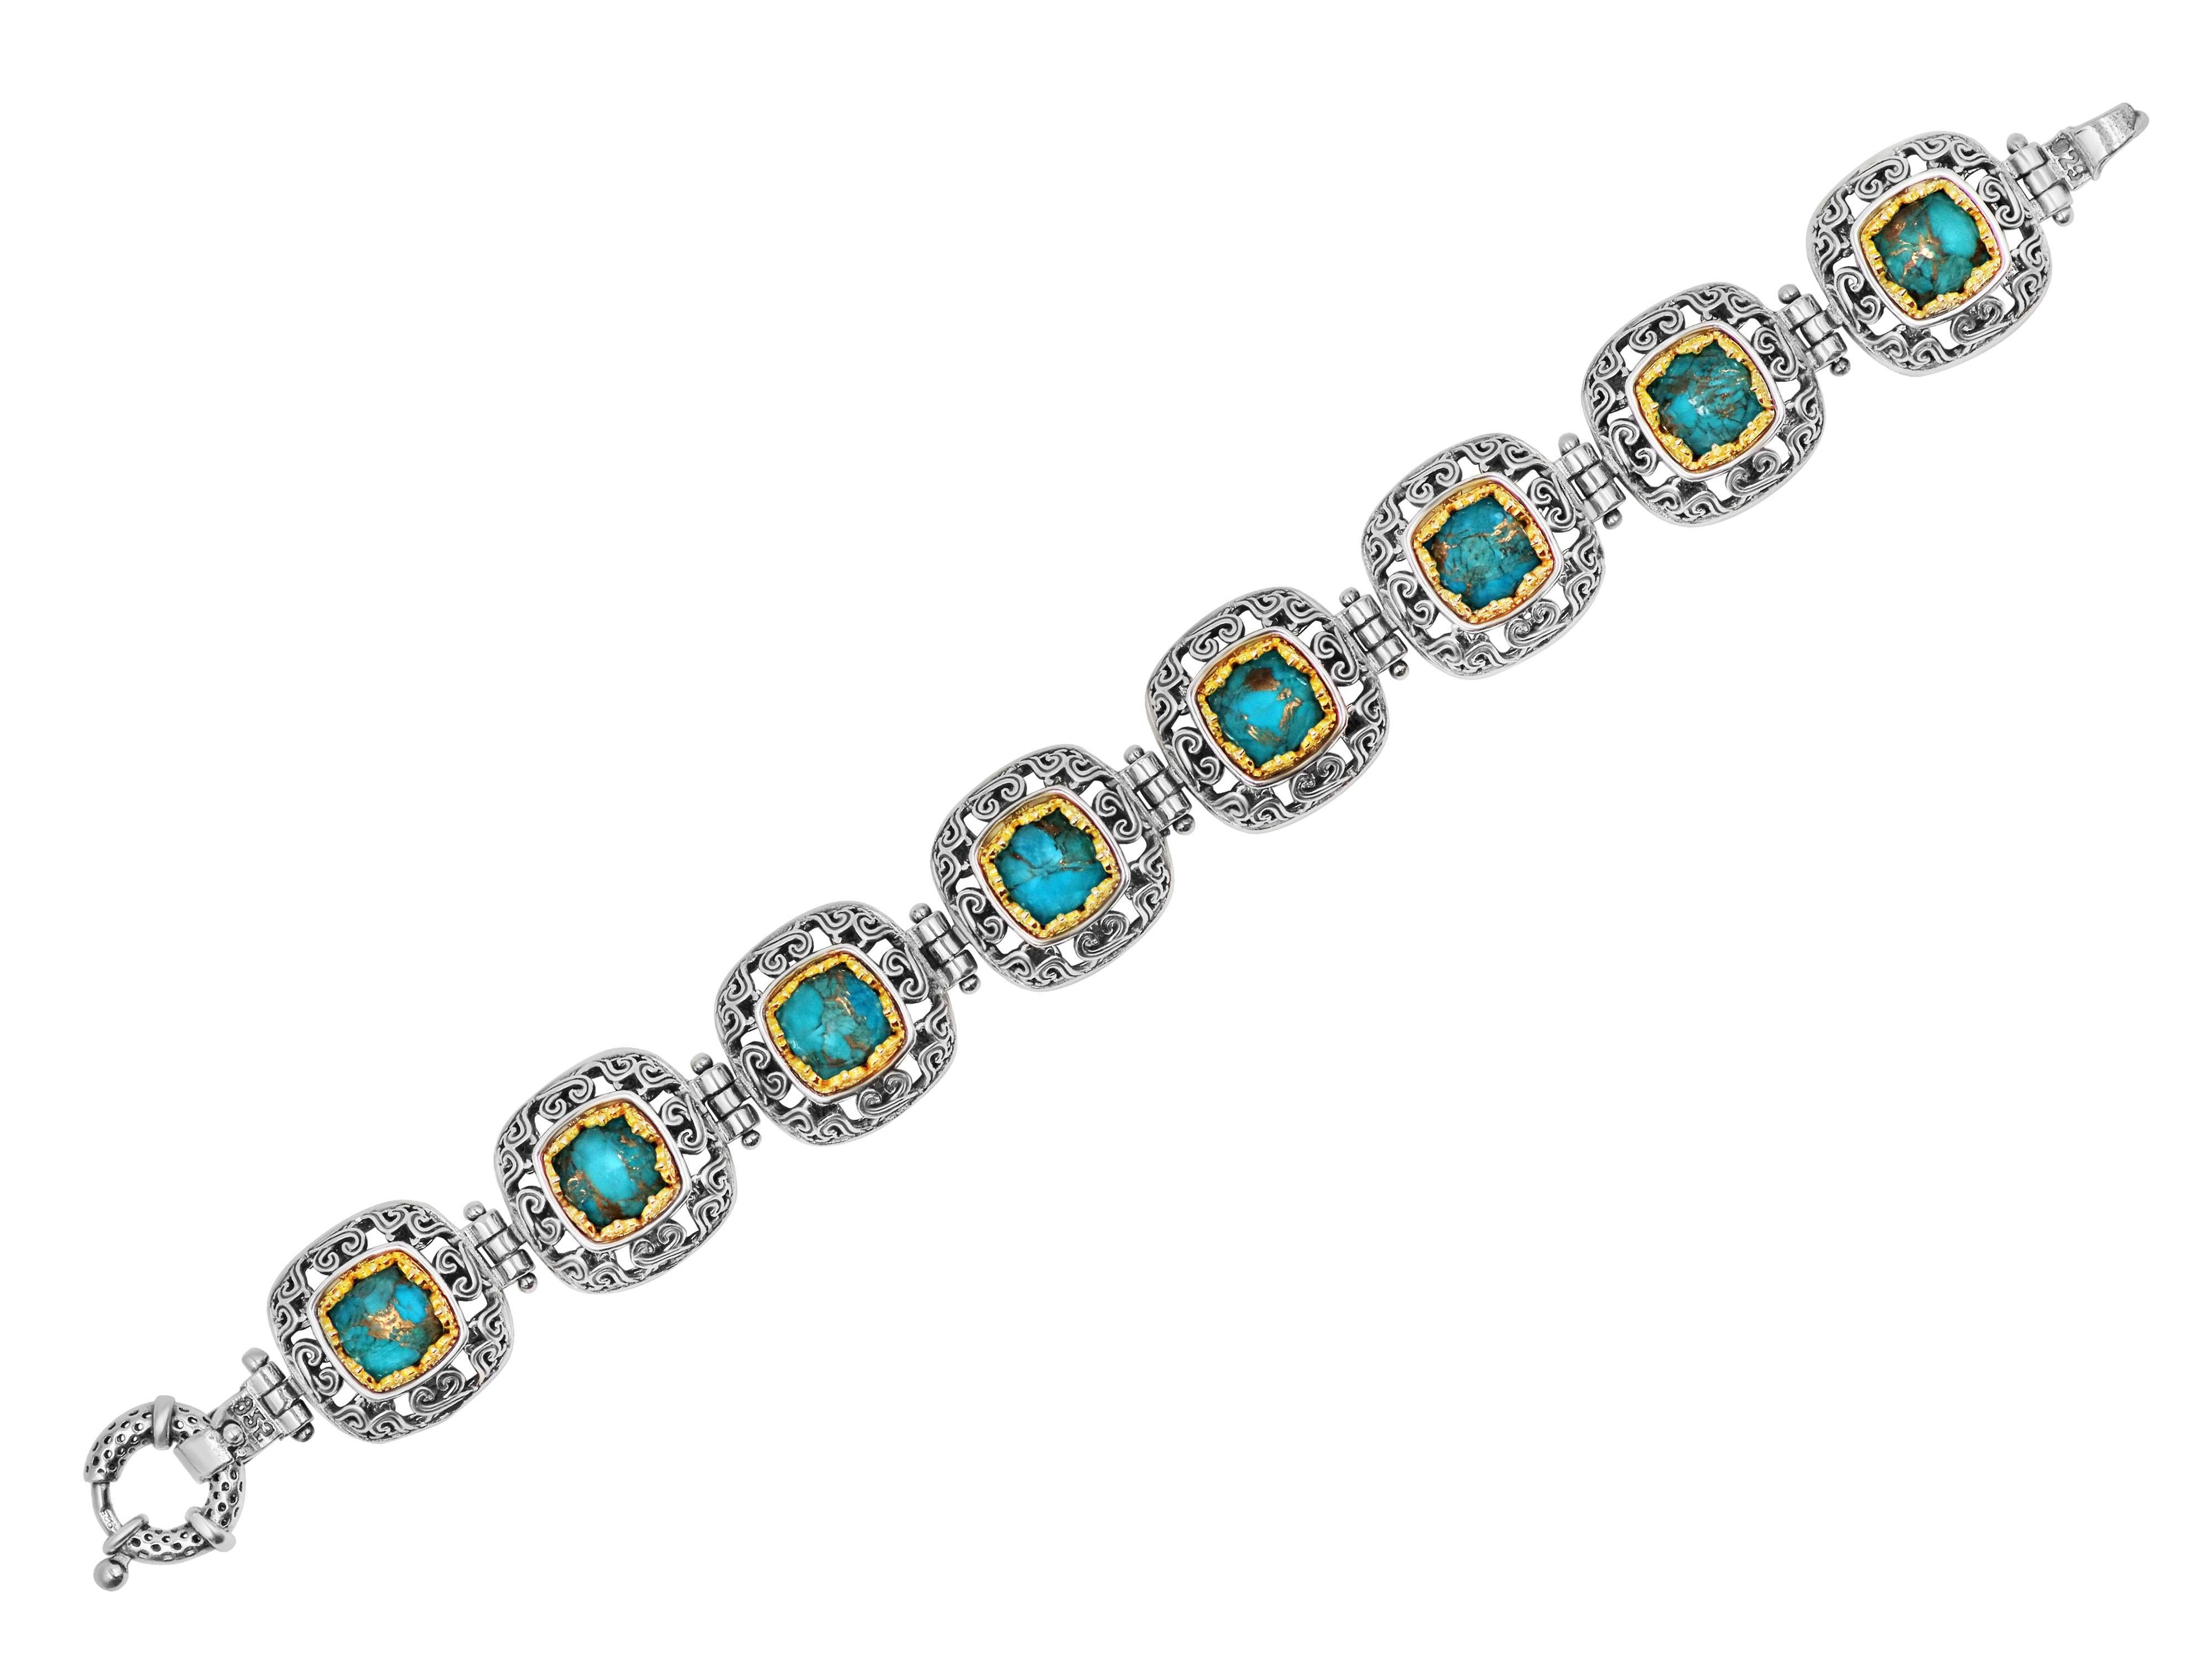 Sterling silver Byzantine bracelet with an intricate detail and gold plated features that enhance the beauty and the level of work. Set with copper turquoise, a stone that makes it even more interesting.